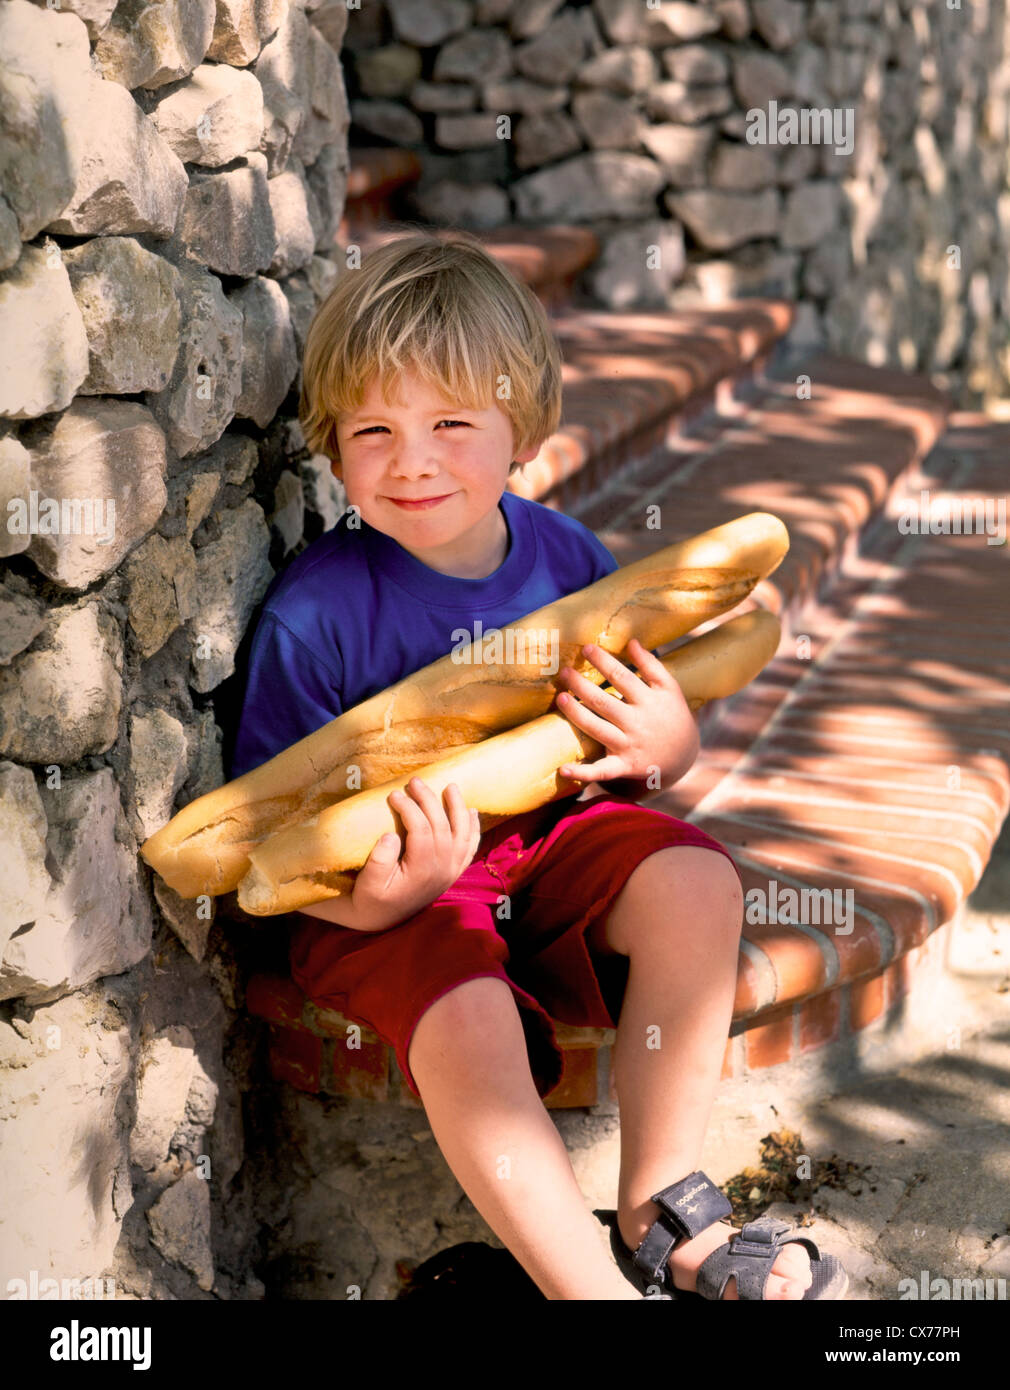 LITTLE BOY HOLDING FRENCH BREAD Stock Photo